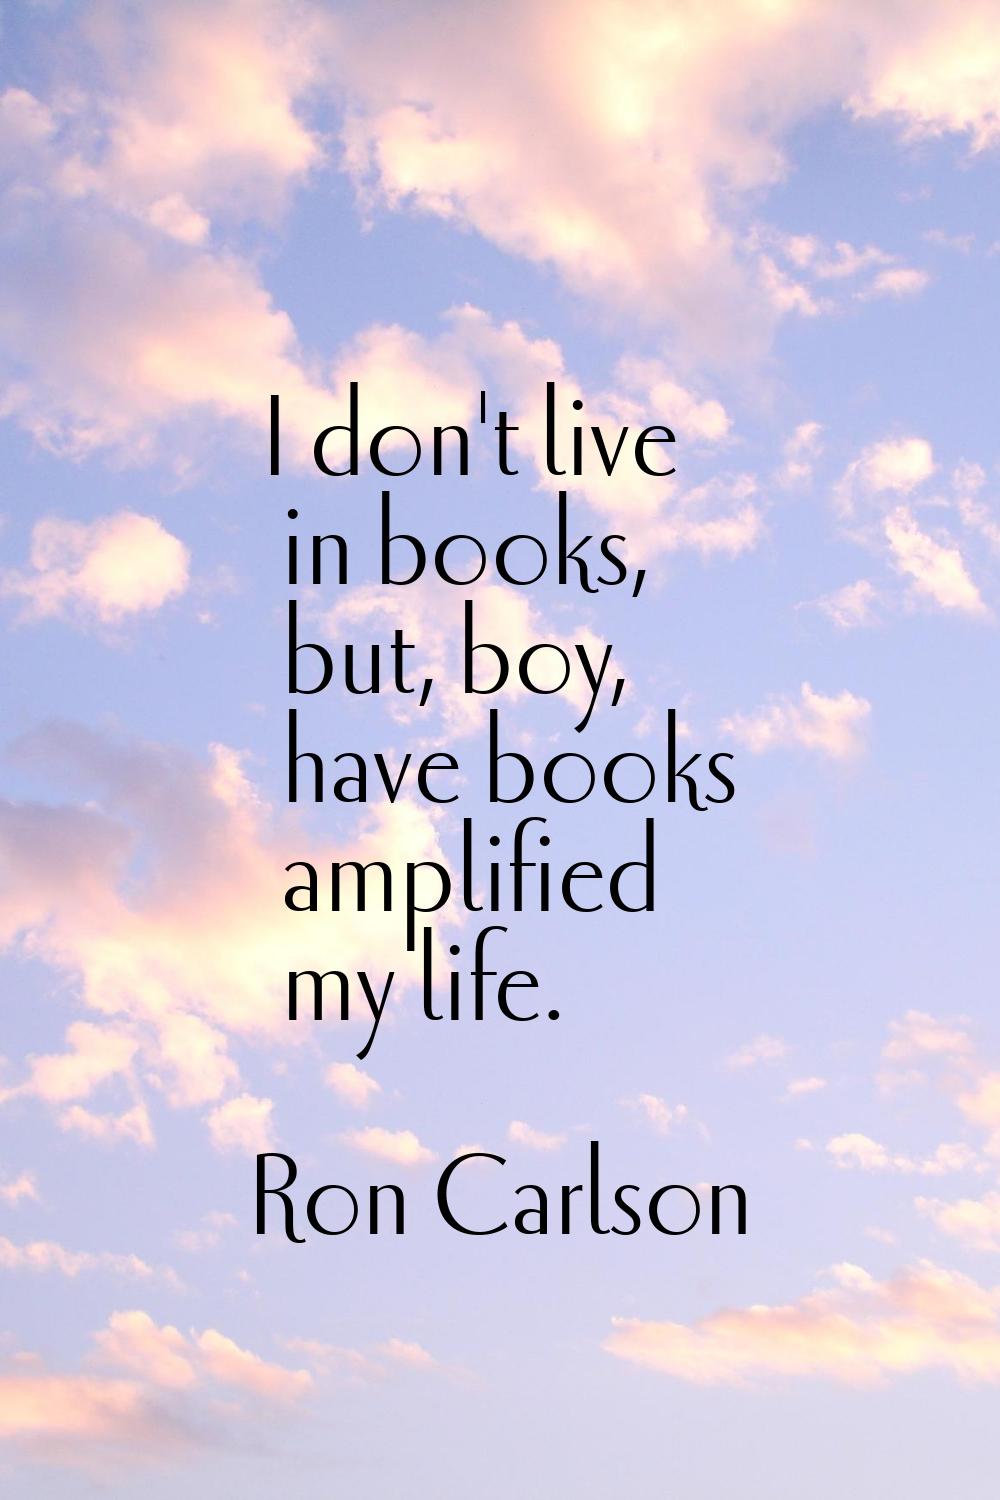 I don't live in books, but, boy, have books amplified my life.